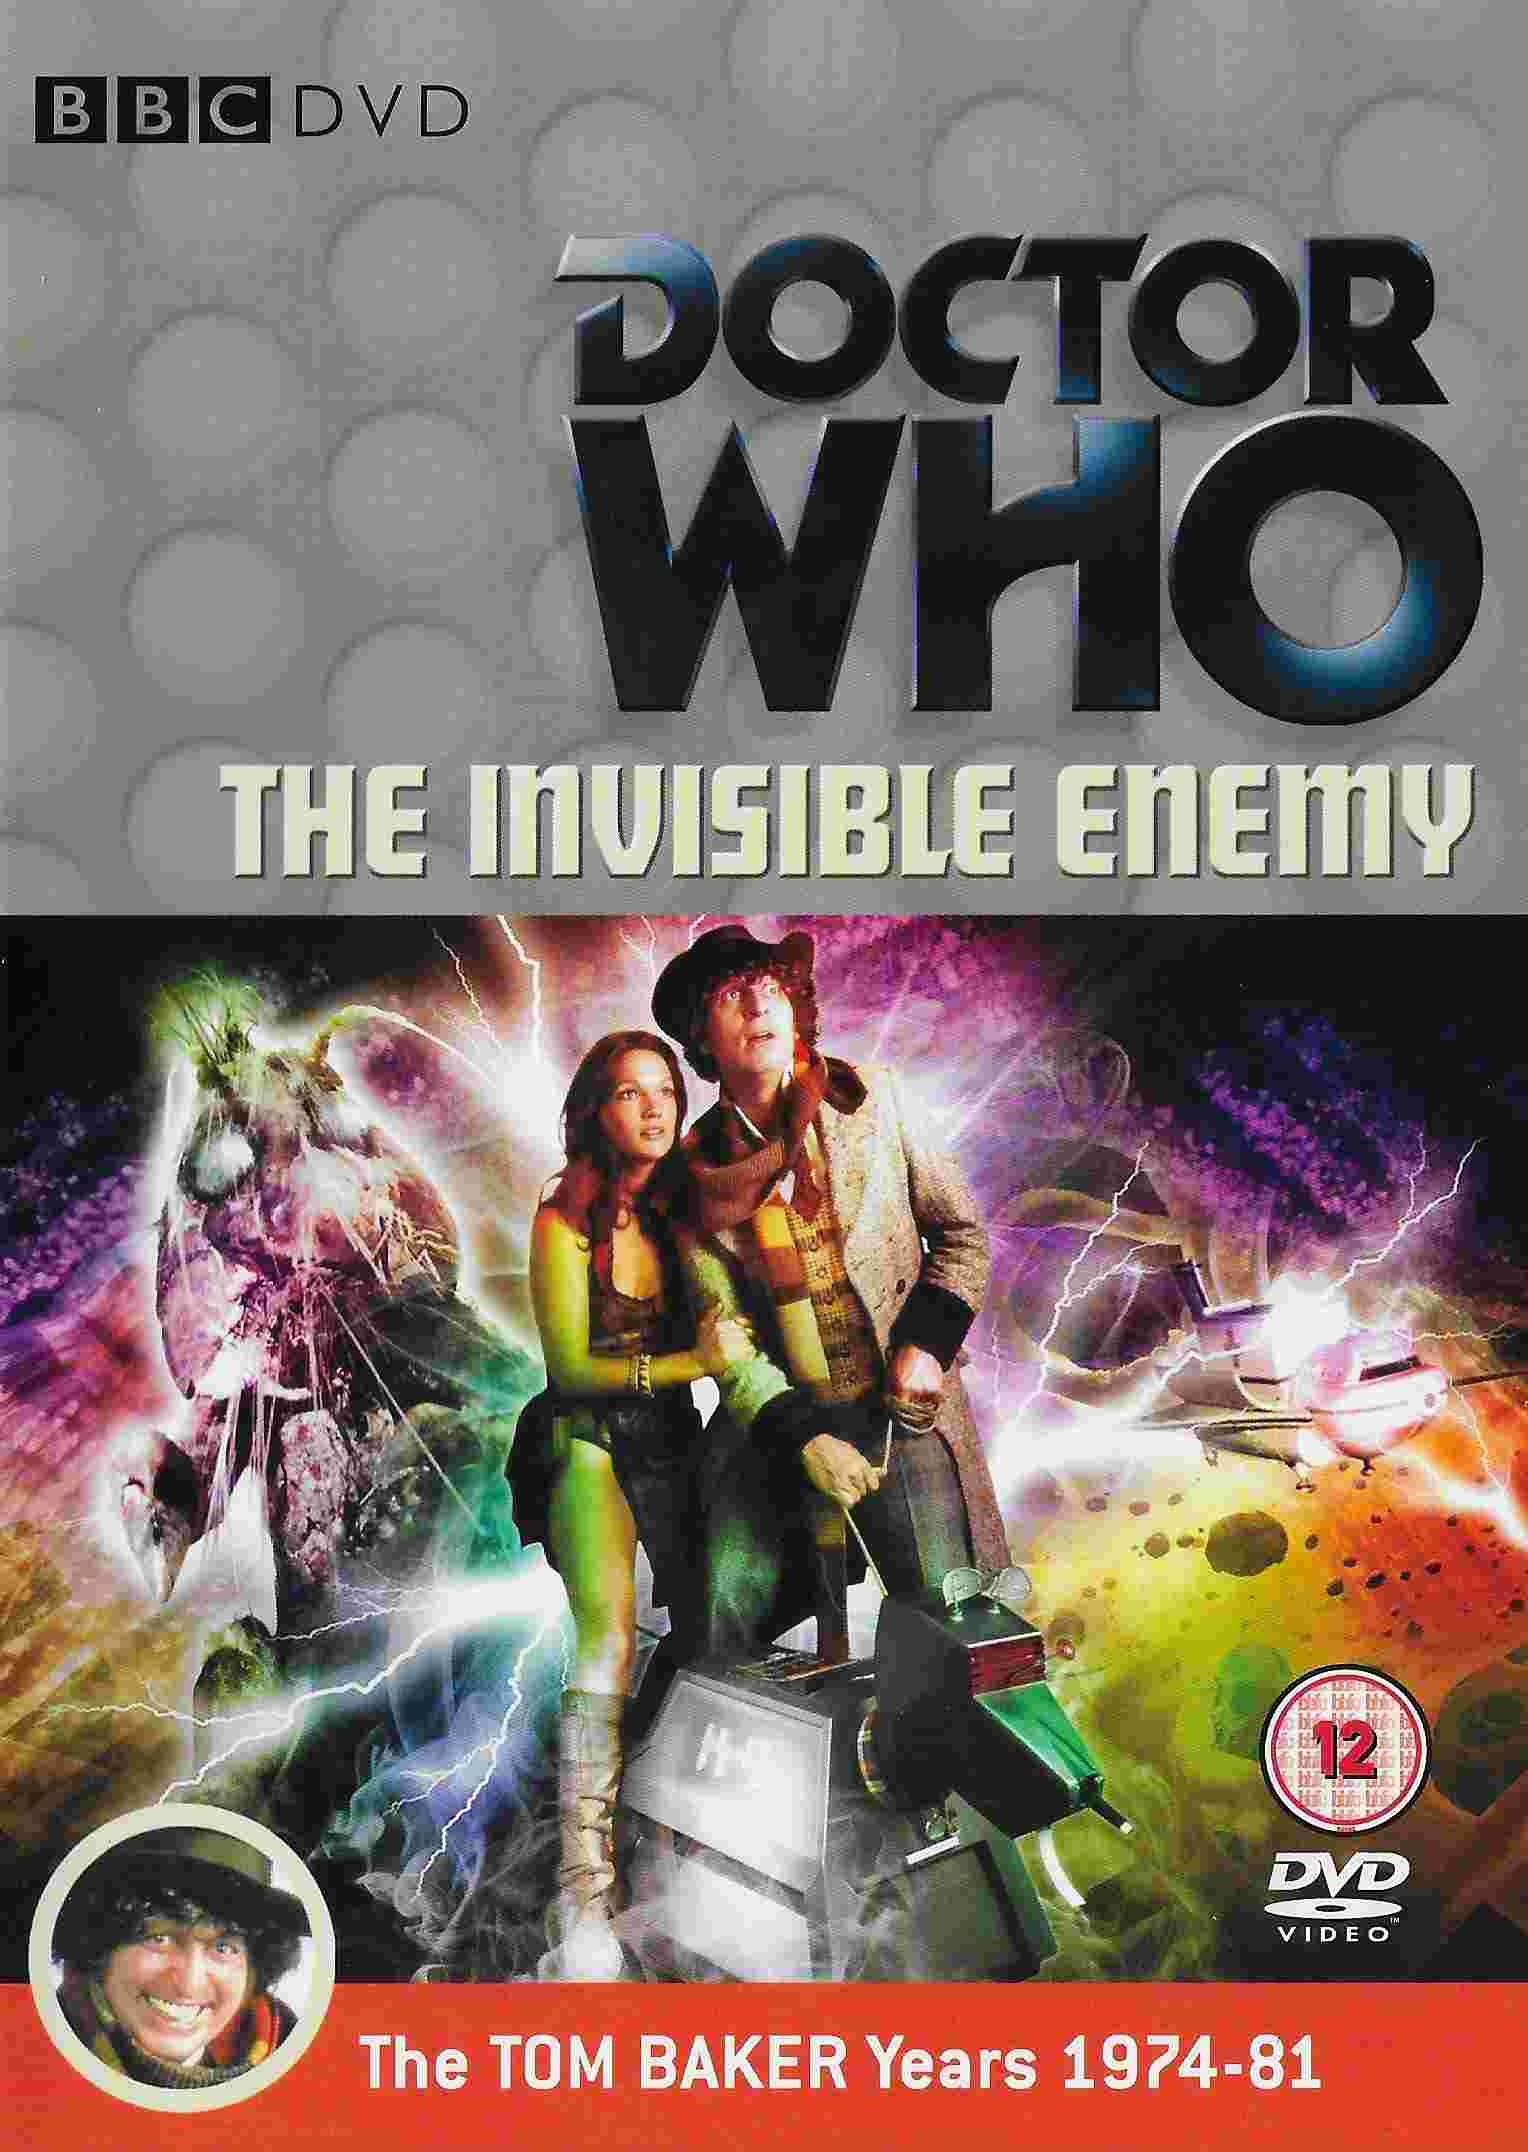 Front cover of BBCDVD 2799